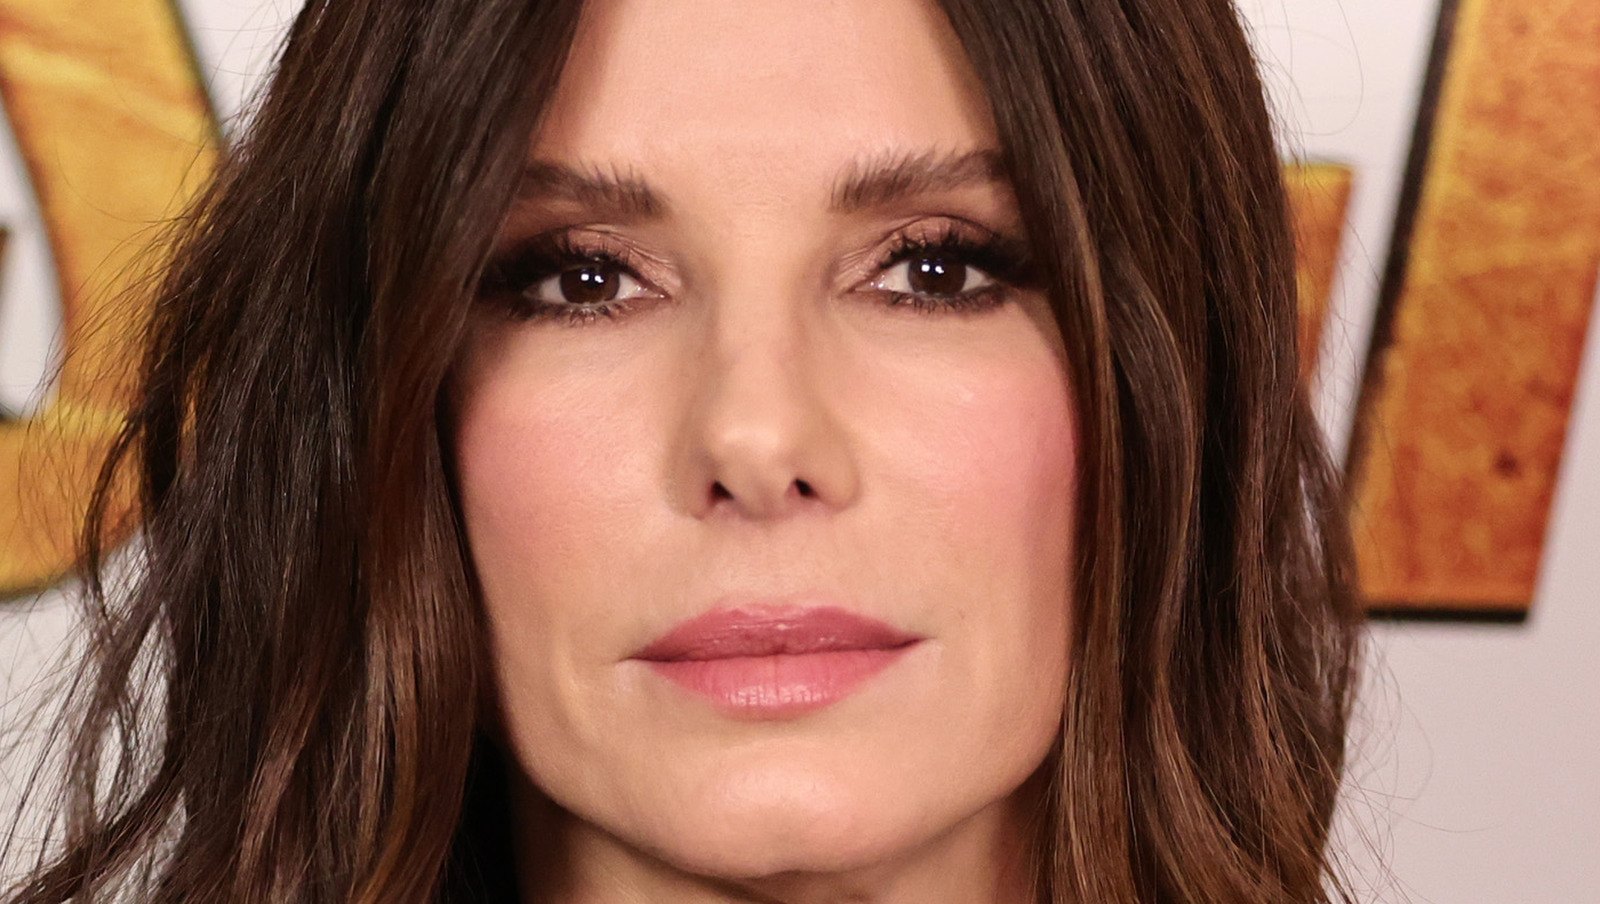 Sandra Bullock says she's embarrassed that she made Speed 2